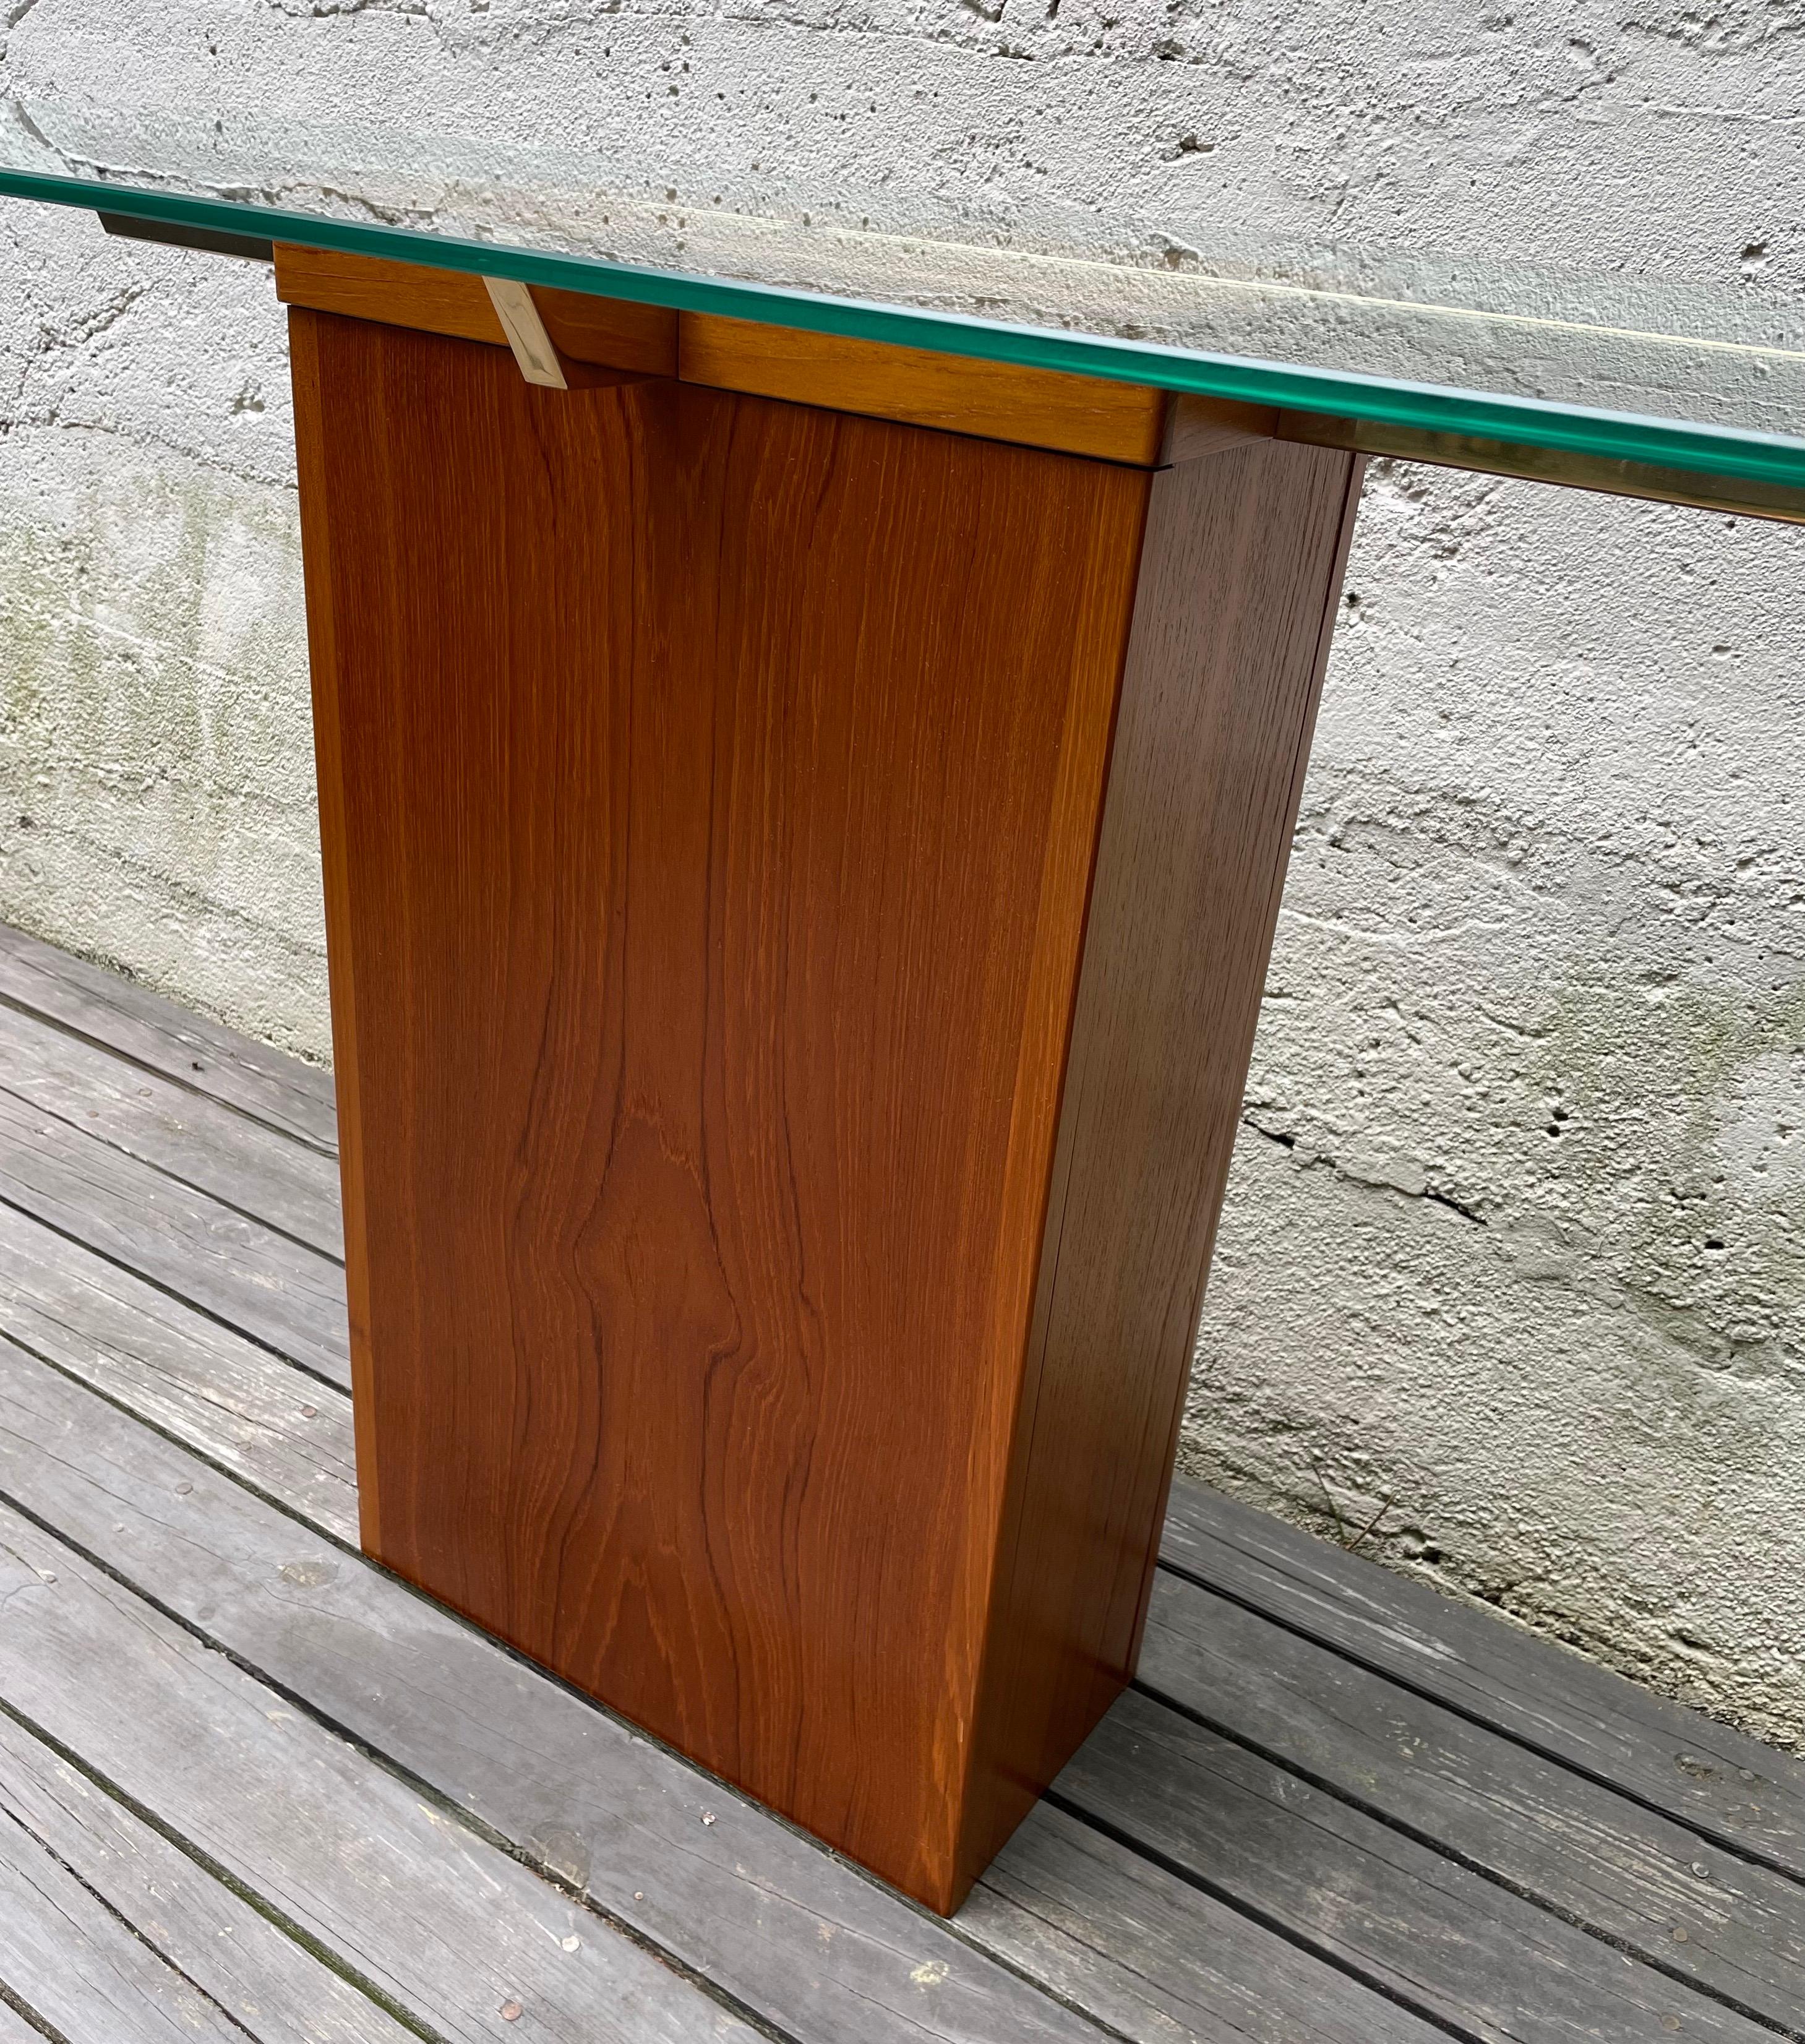 Late 20th Century Mid Century Modern Teak and Glass Foyer or Console Table by Trioh Mobler Denmark